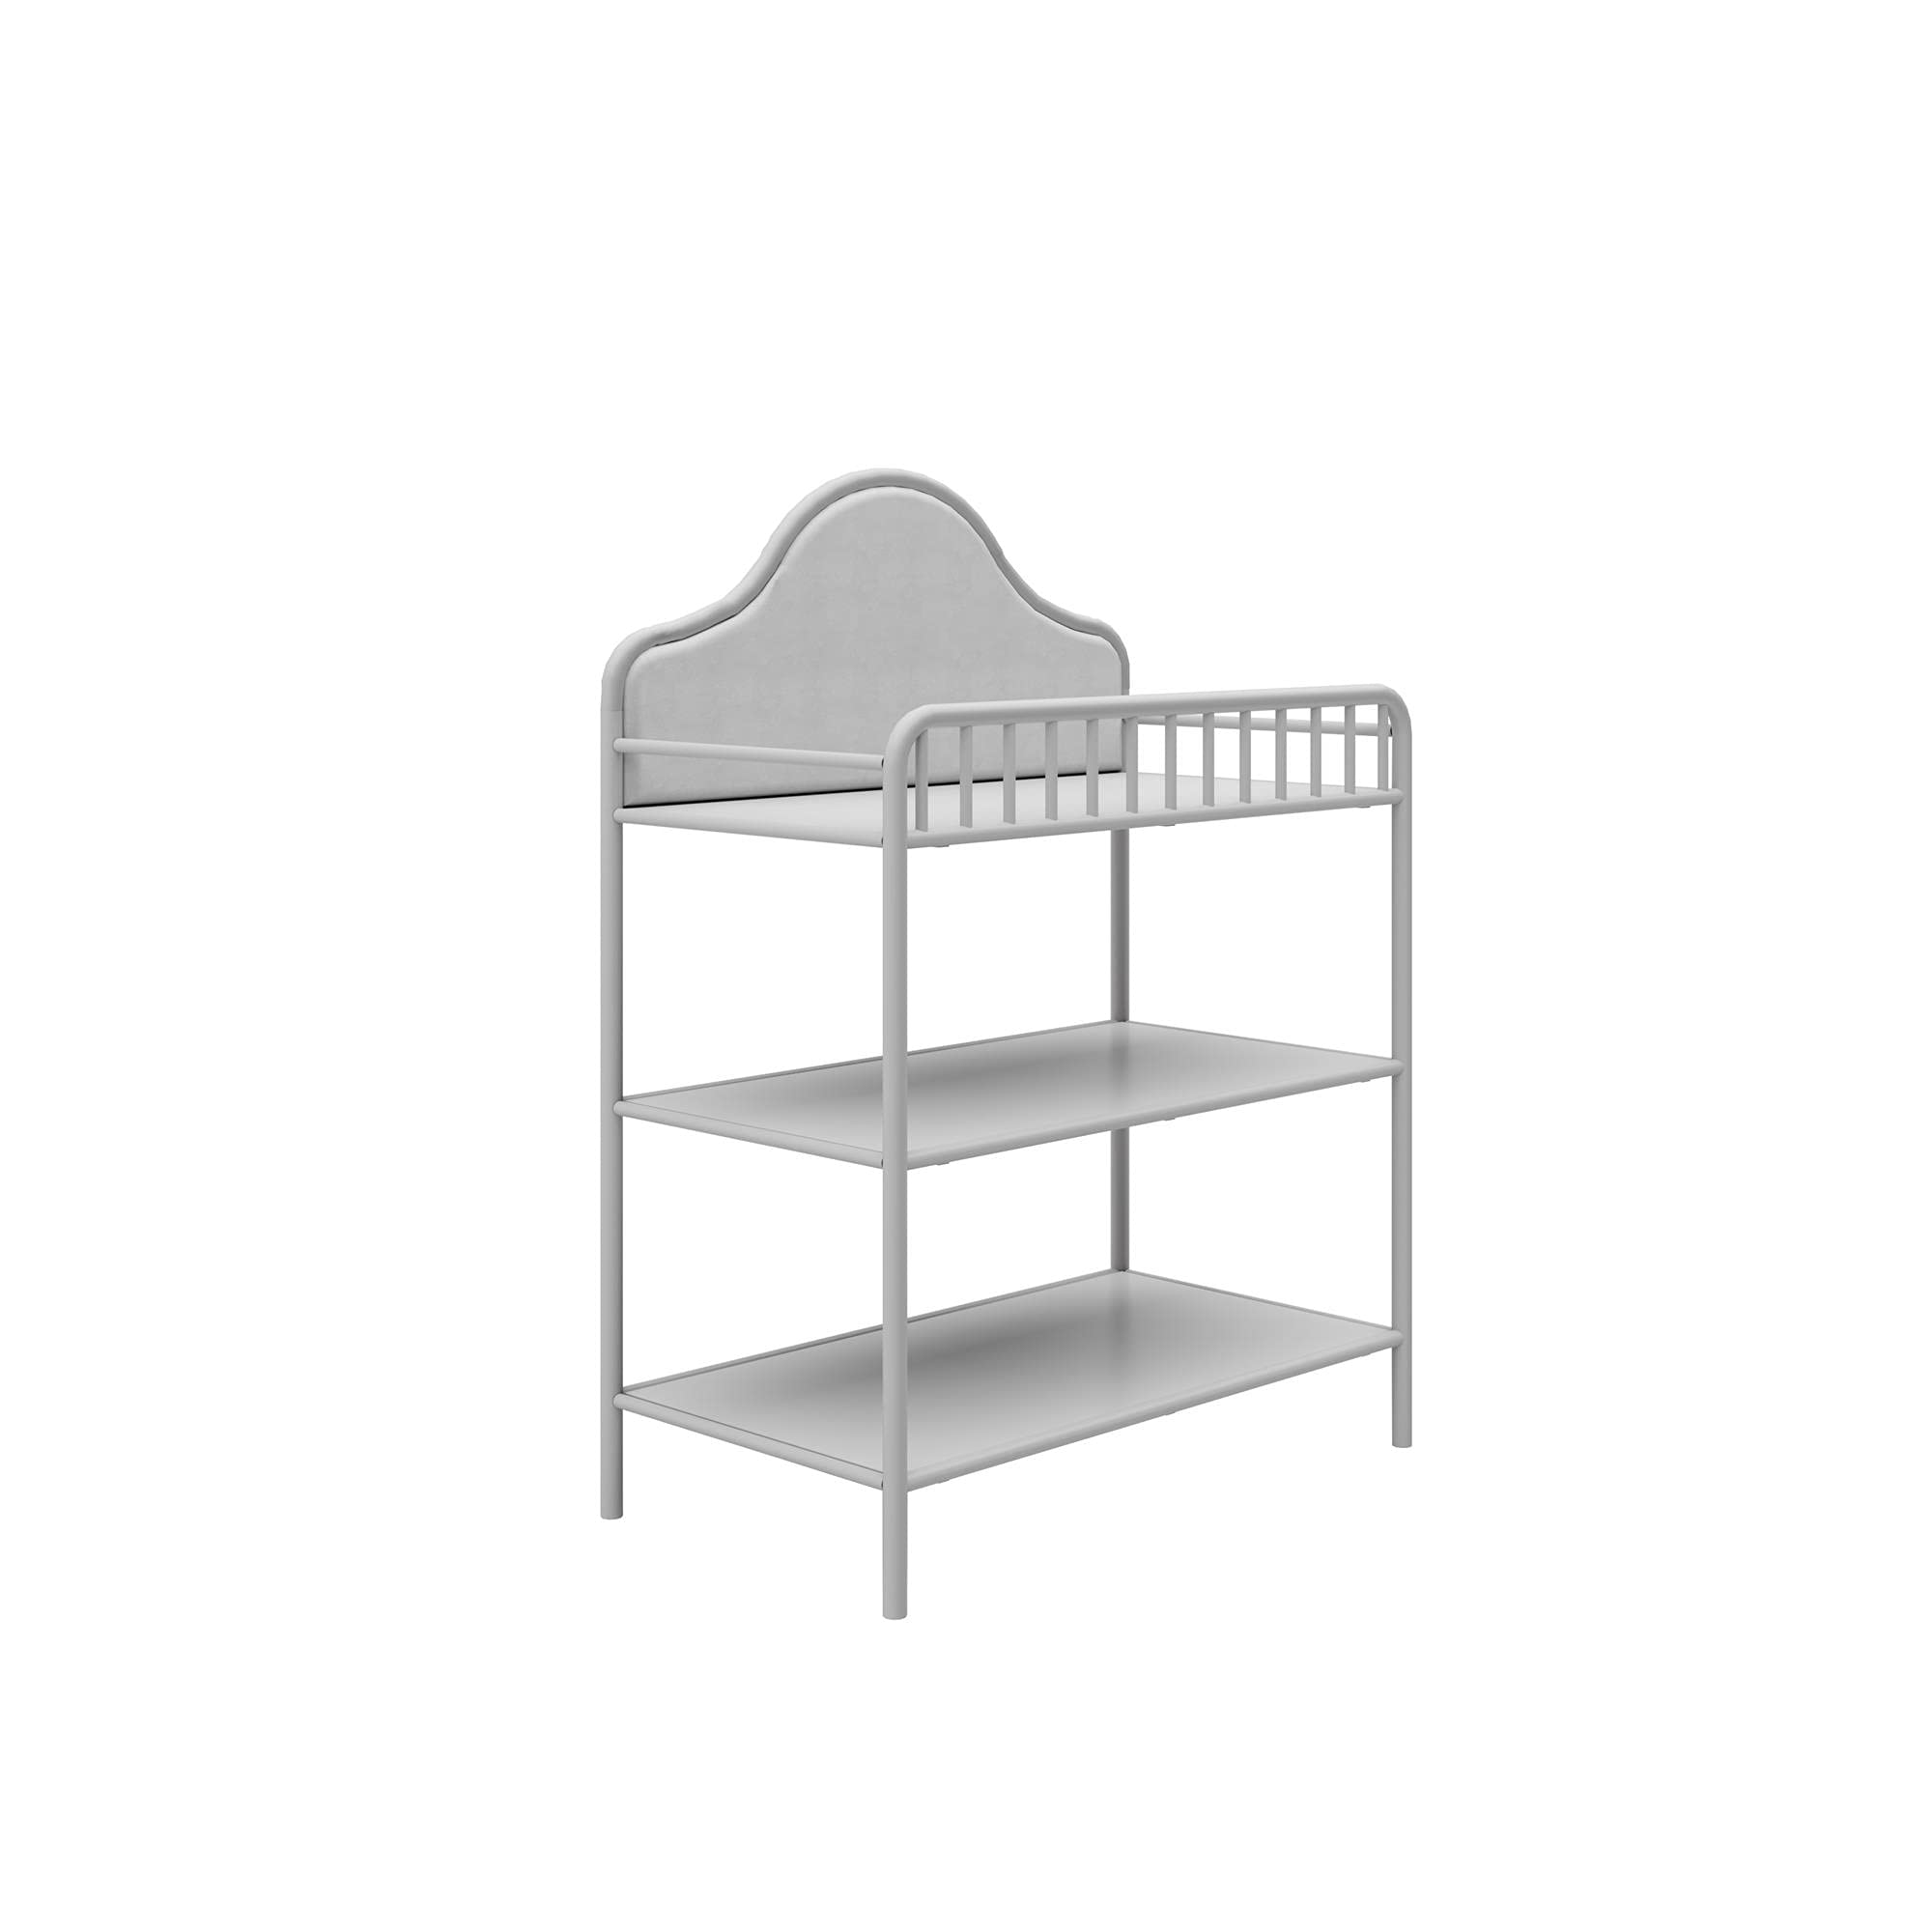 Little Seeds Piper Upholstered Metal Changing Table, Nursery Furniture, Dove Gray